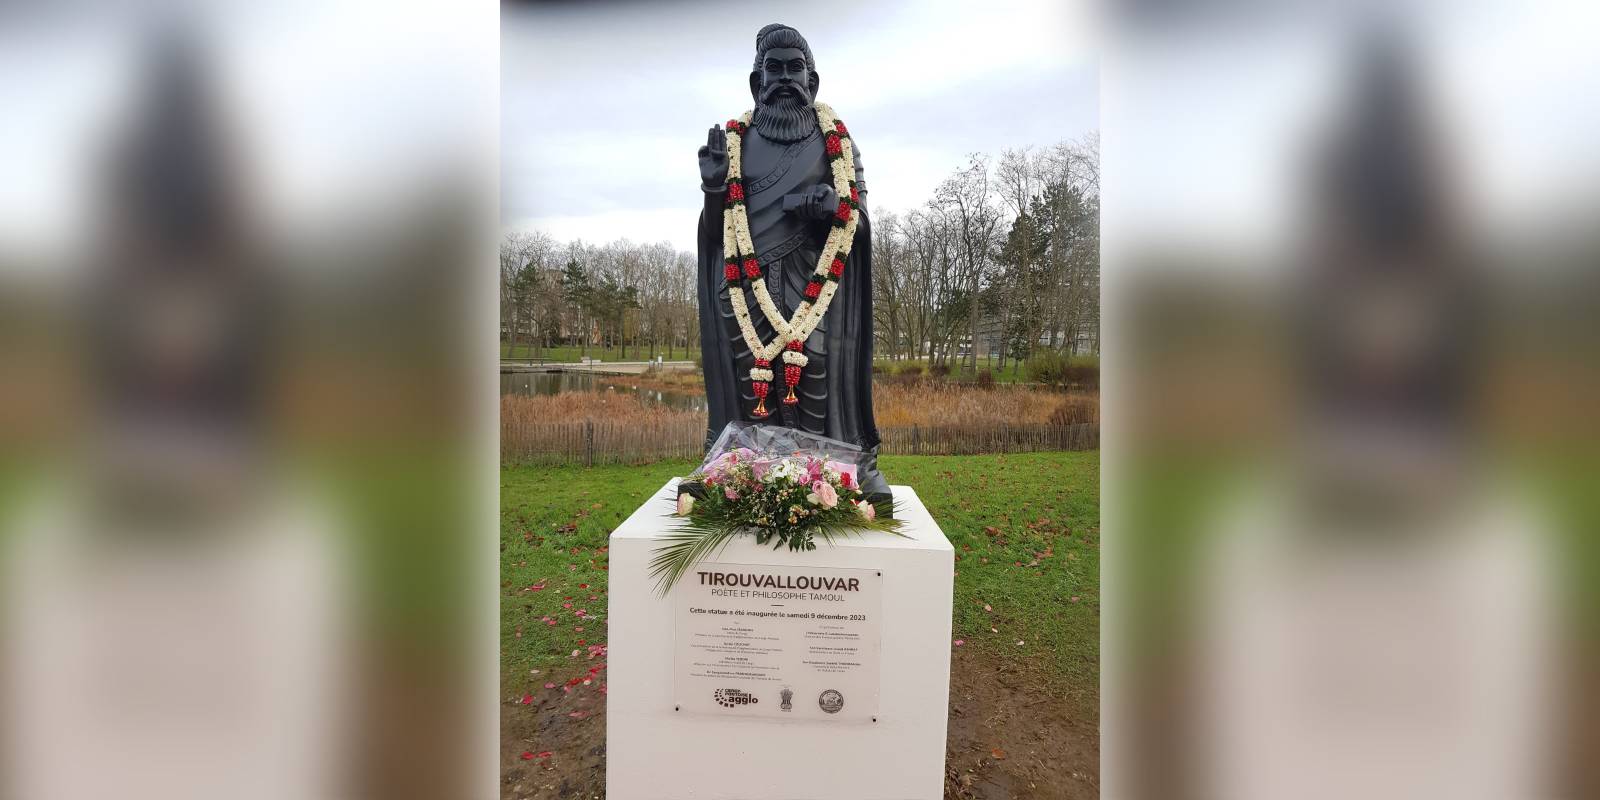 A statue of Tamil poet and philosopher Thiruvalluvar unveiled in French town of Cergy